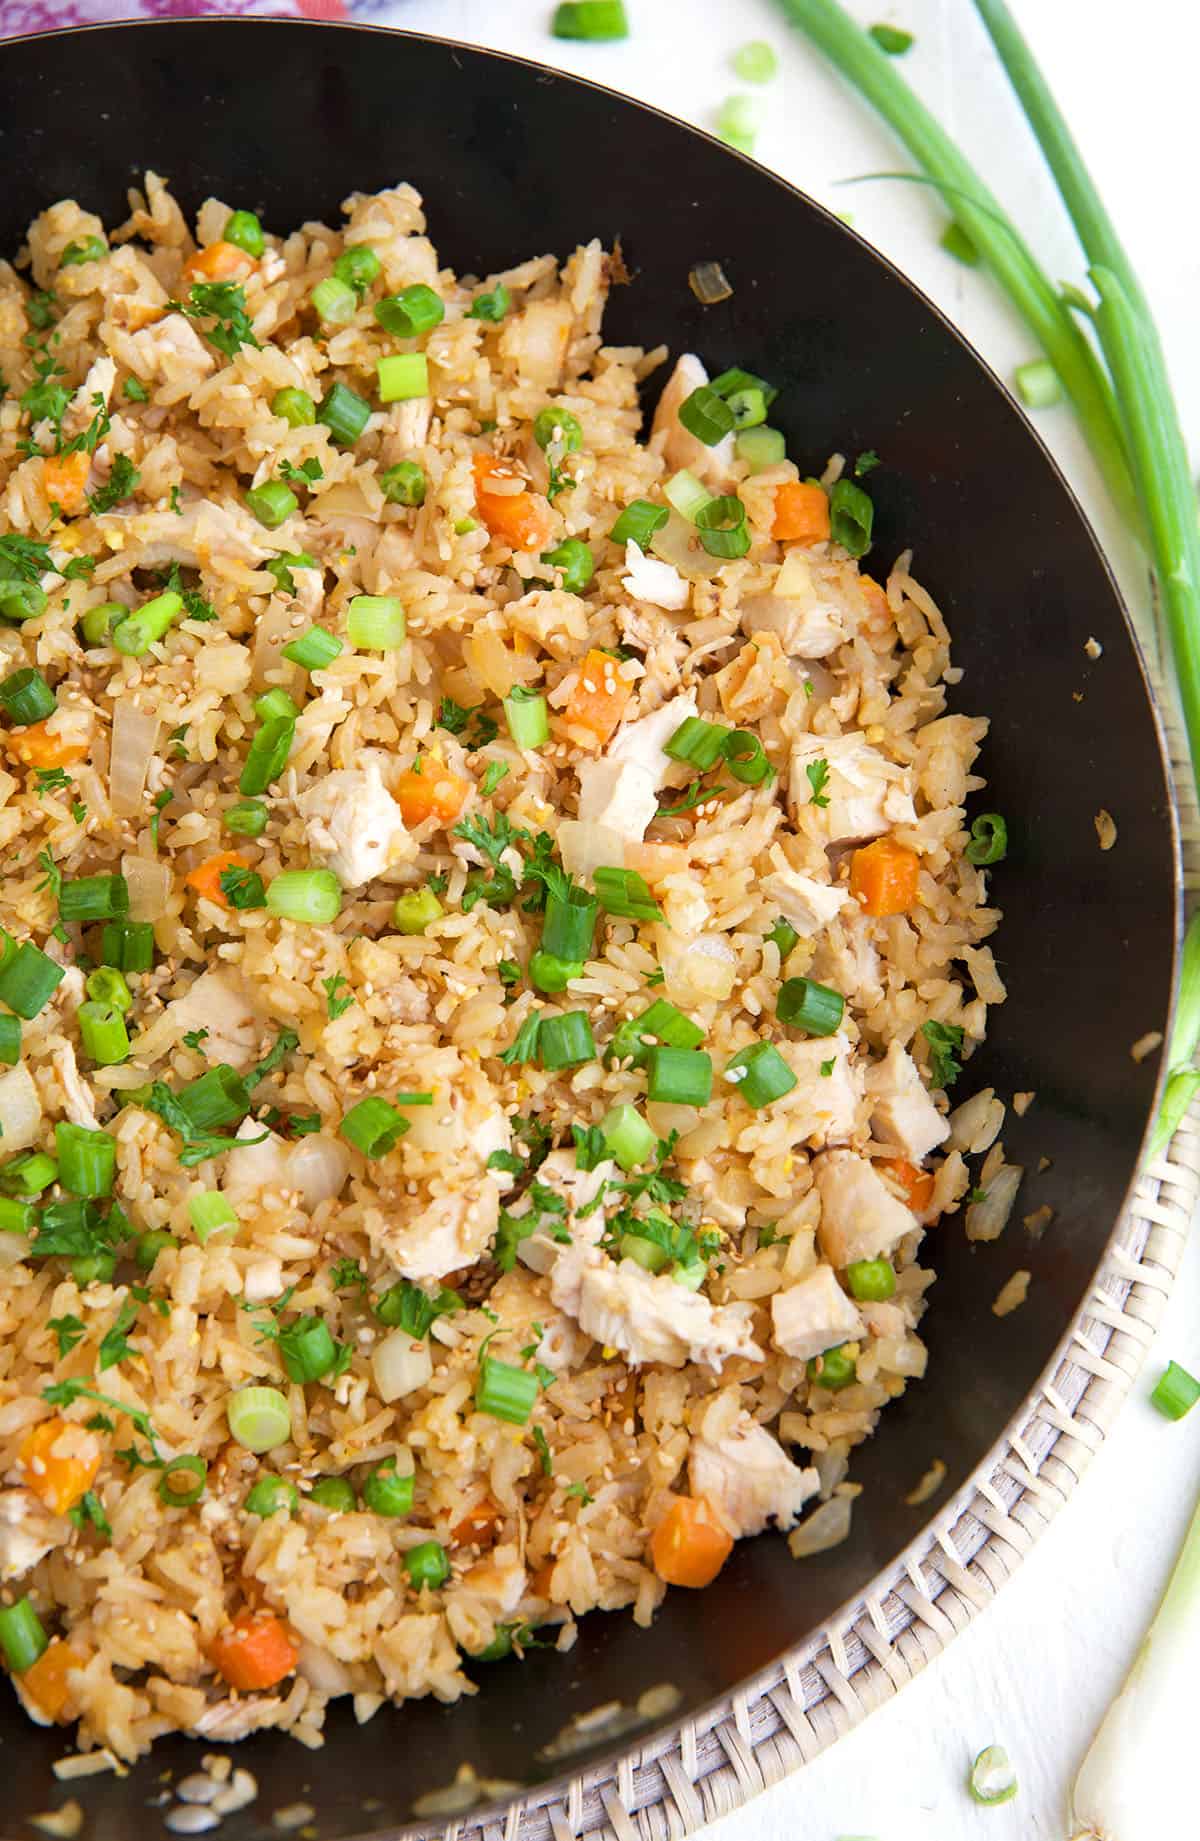 Half of a skillet is shown in the photo. It is filled with chicken fried rice. 